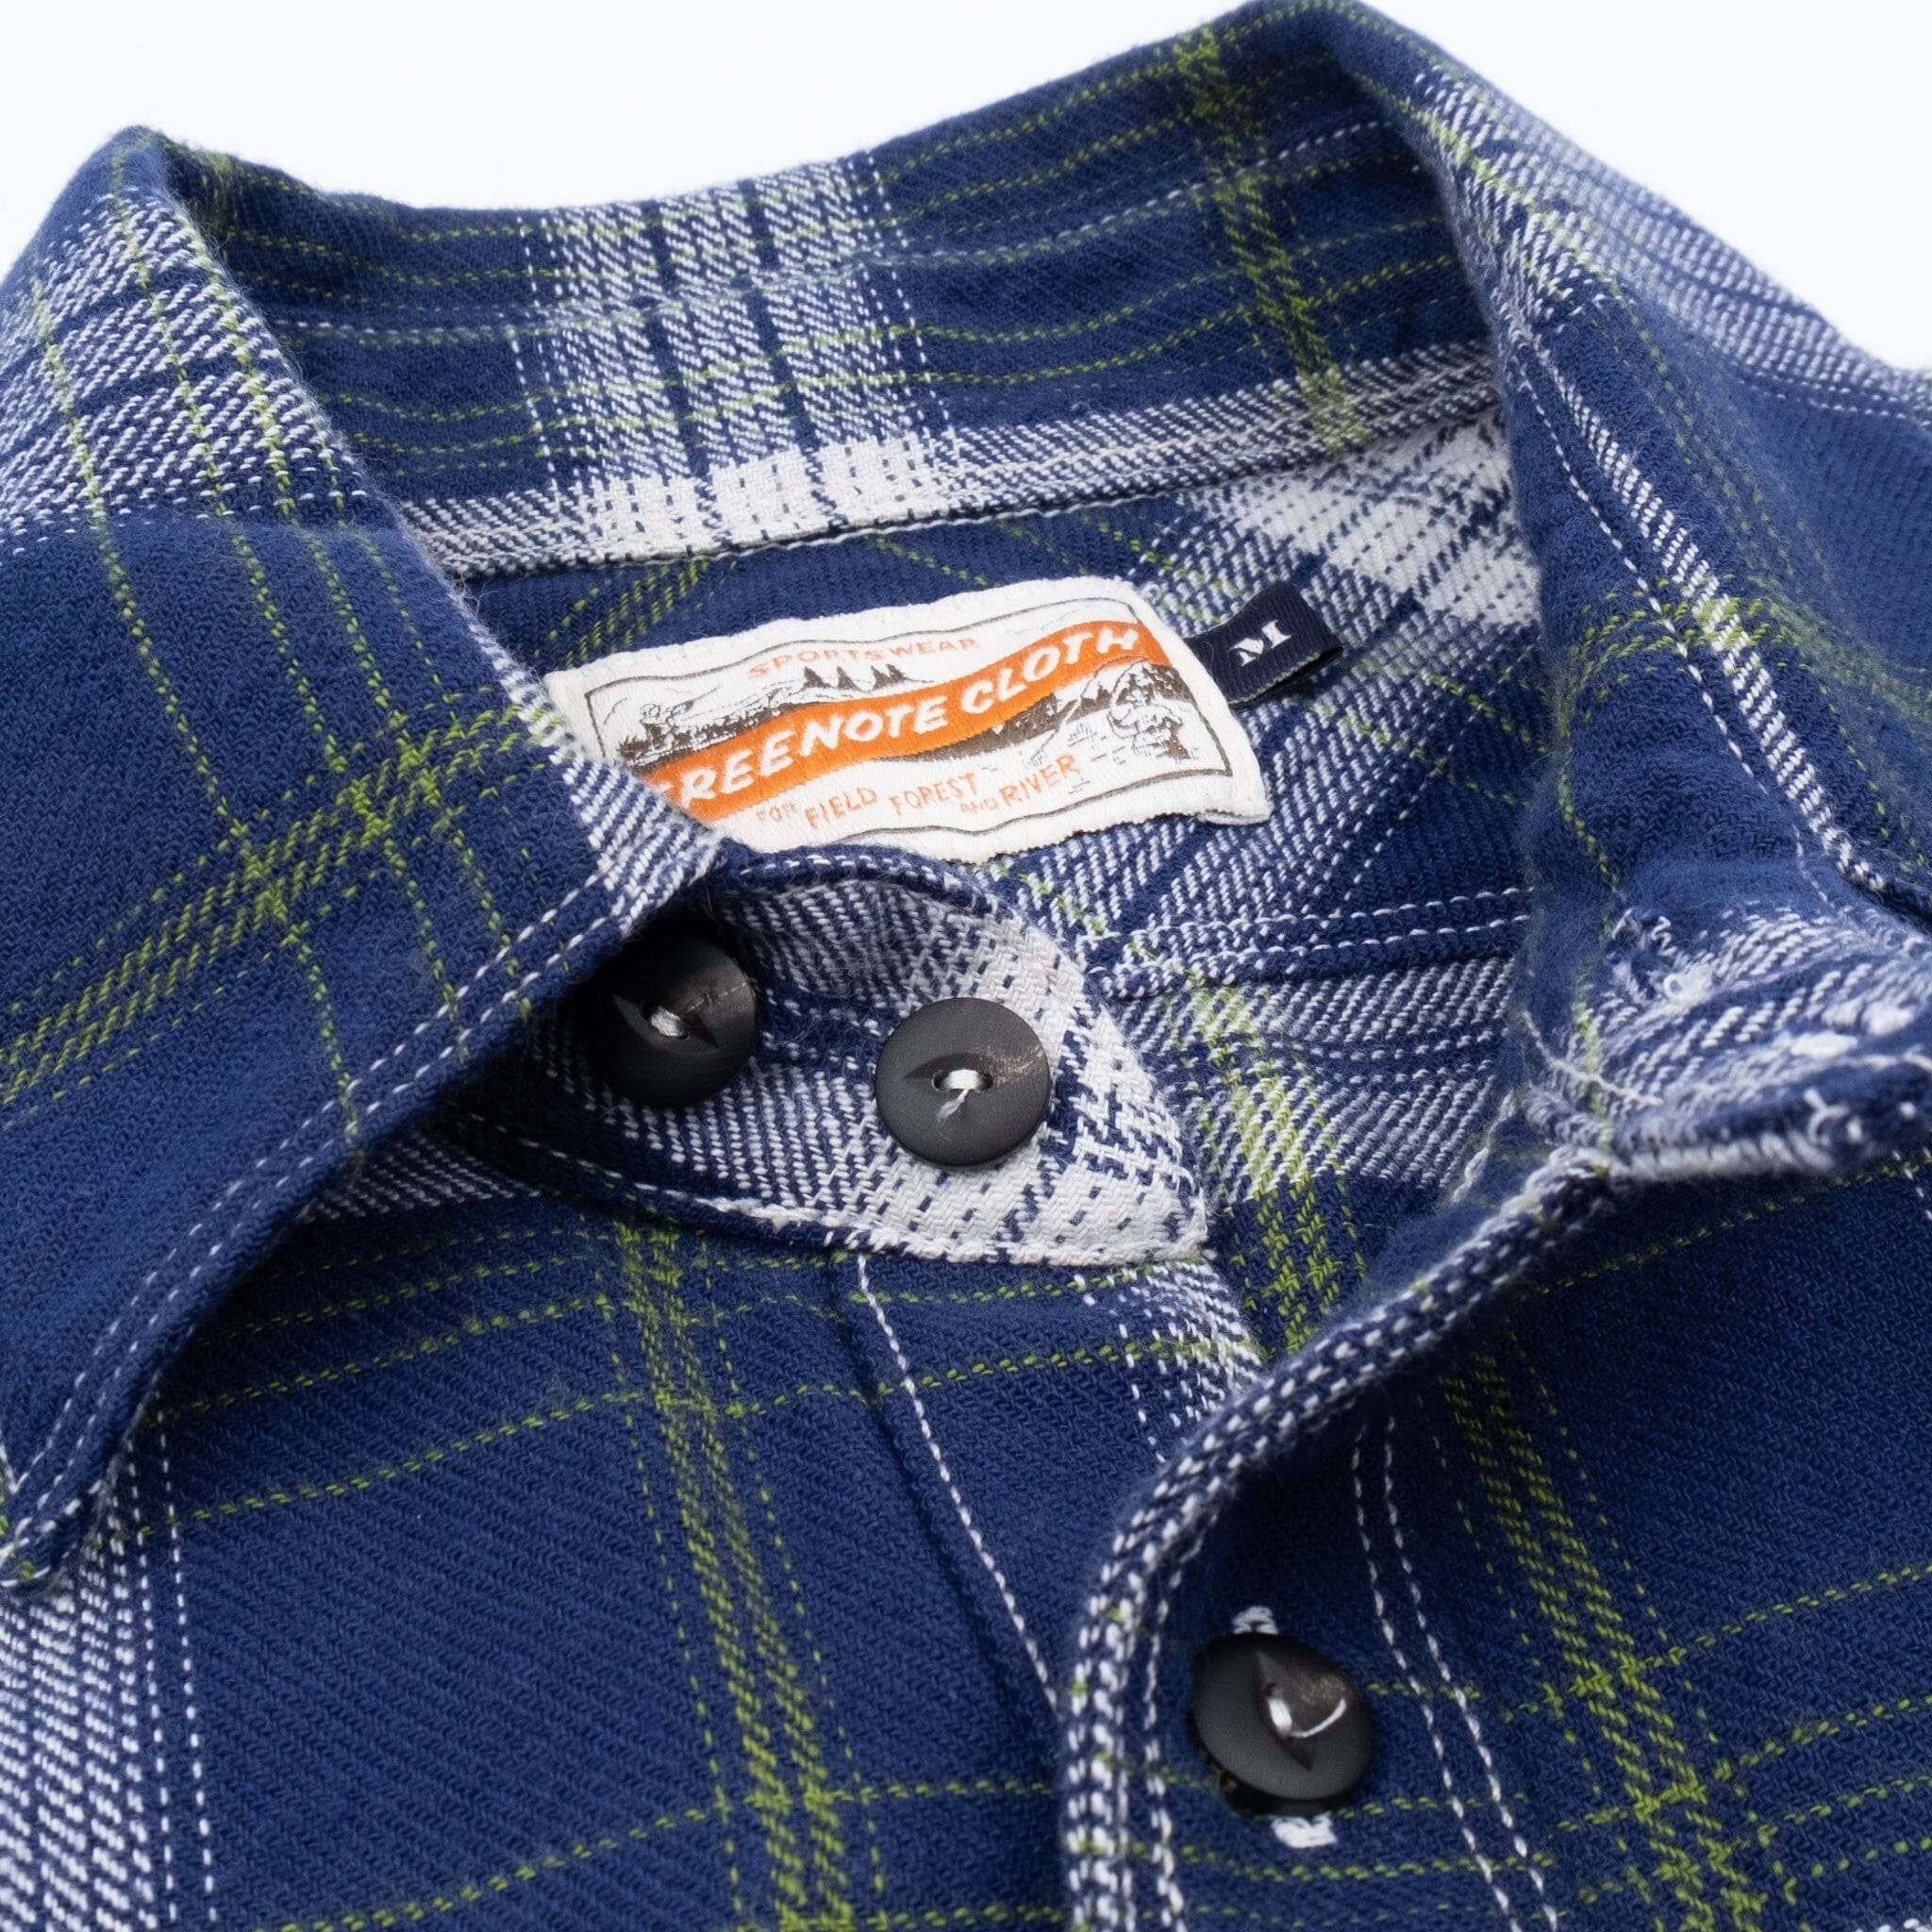 Freenote Cloth - Currant Blue Wing Plaid - City Workshop Men's Supply Co.